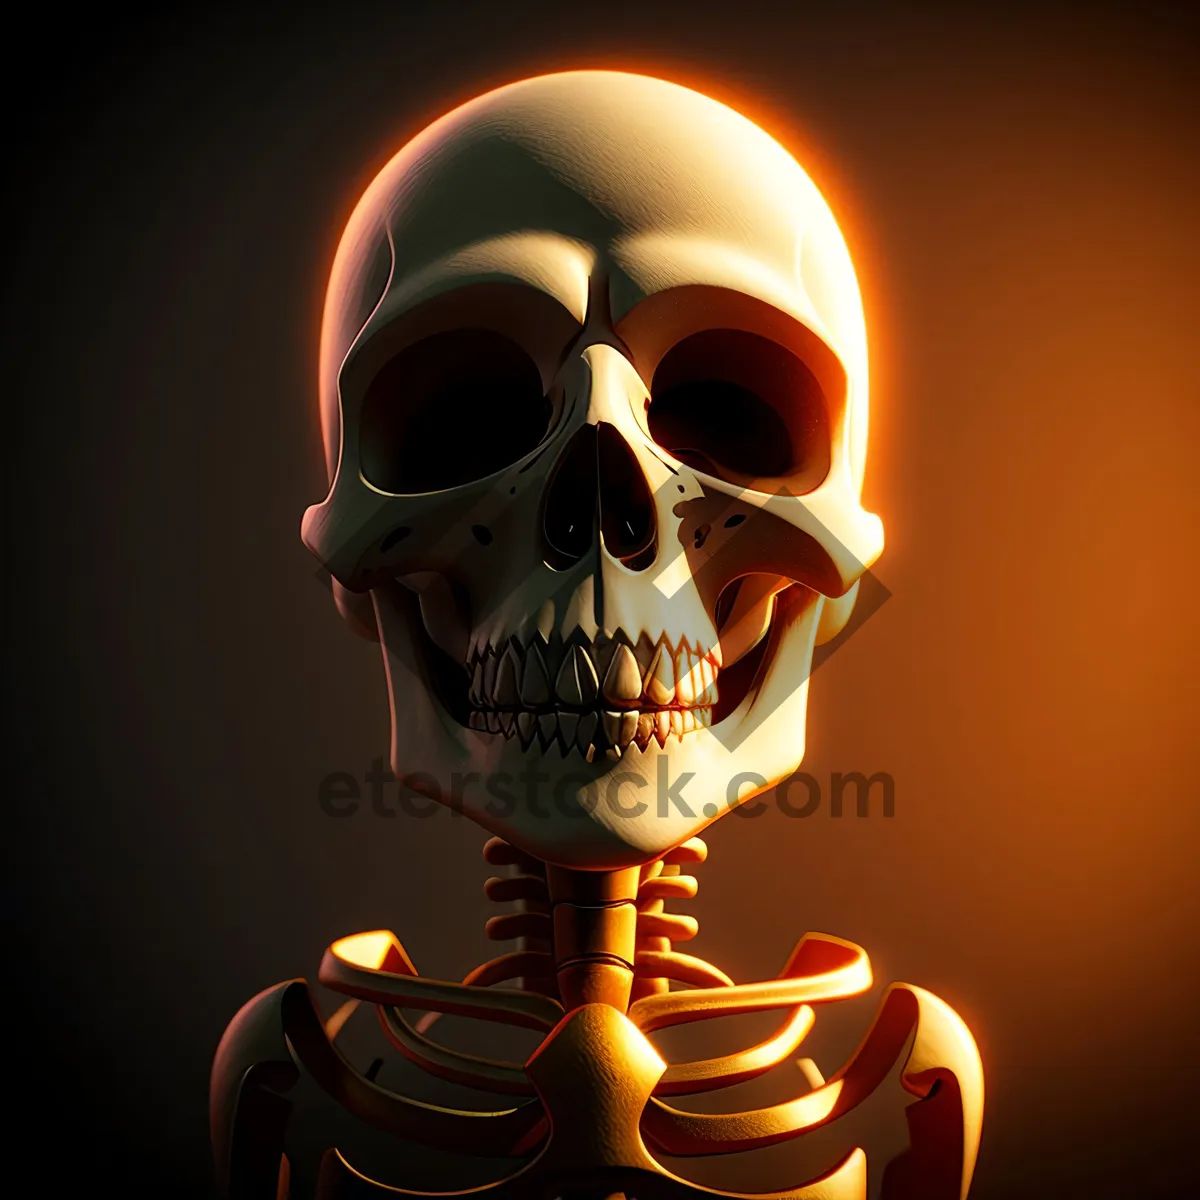 Picture of Sinister Pirate Skull: An Eerie Skeleton Encounter